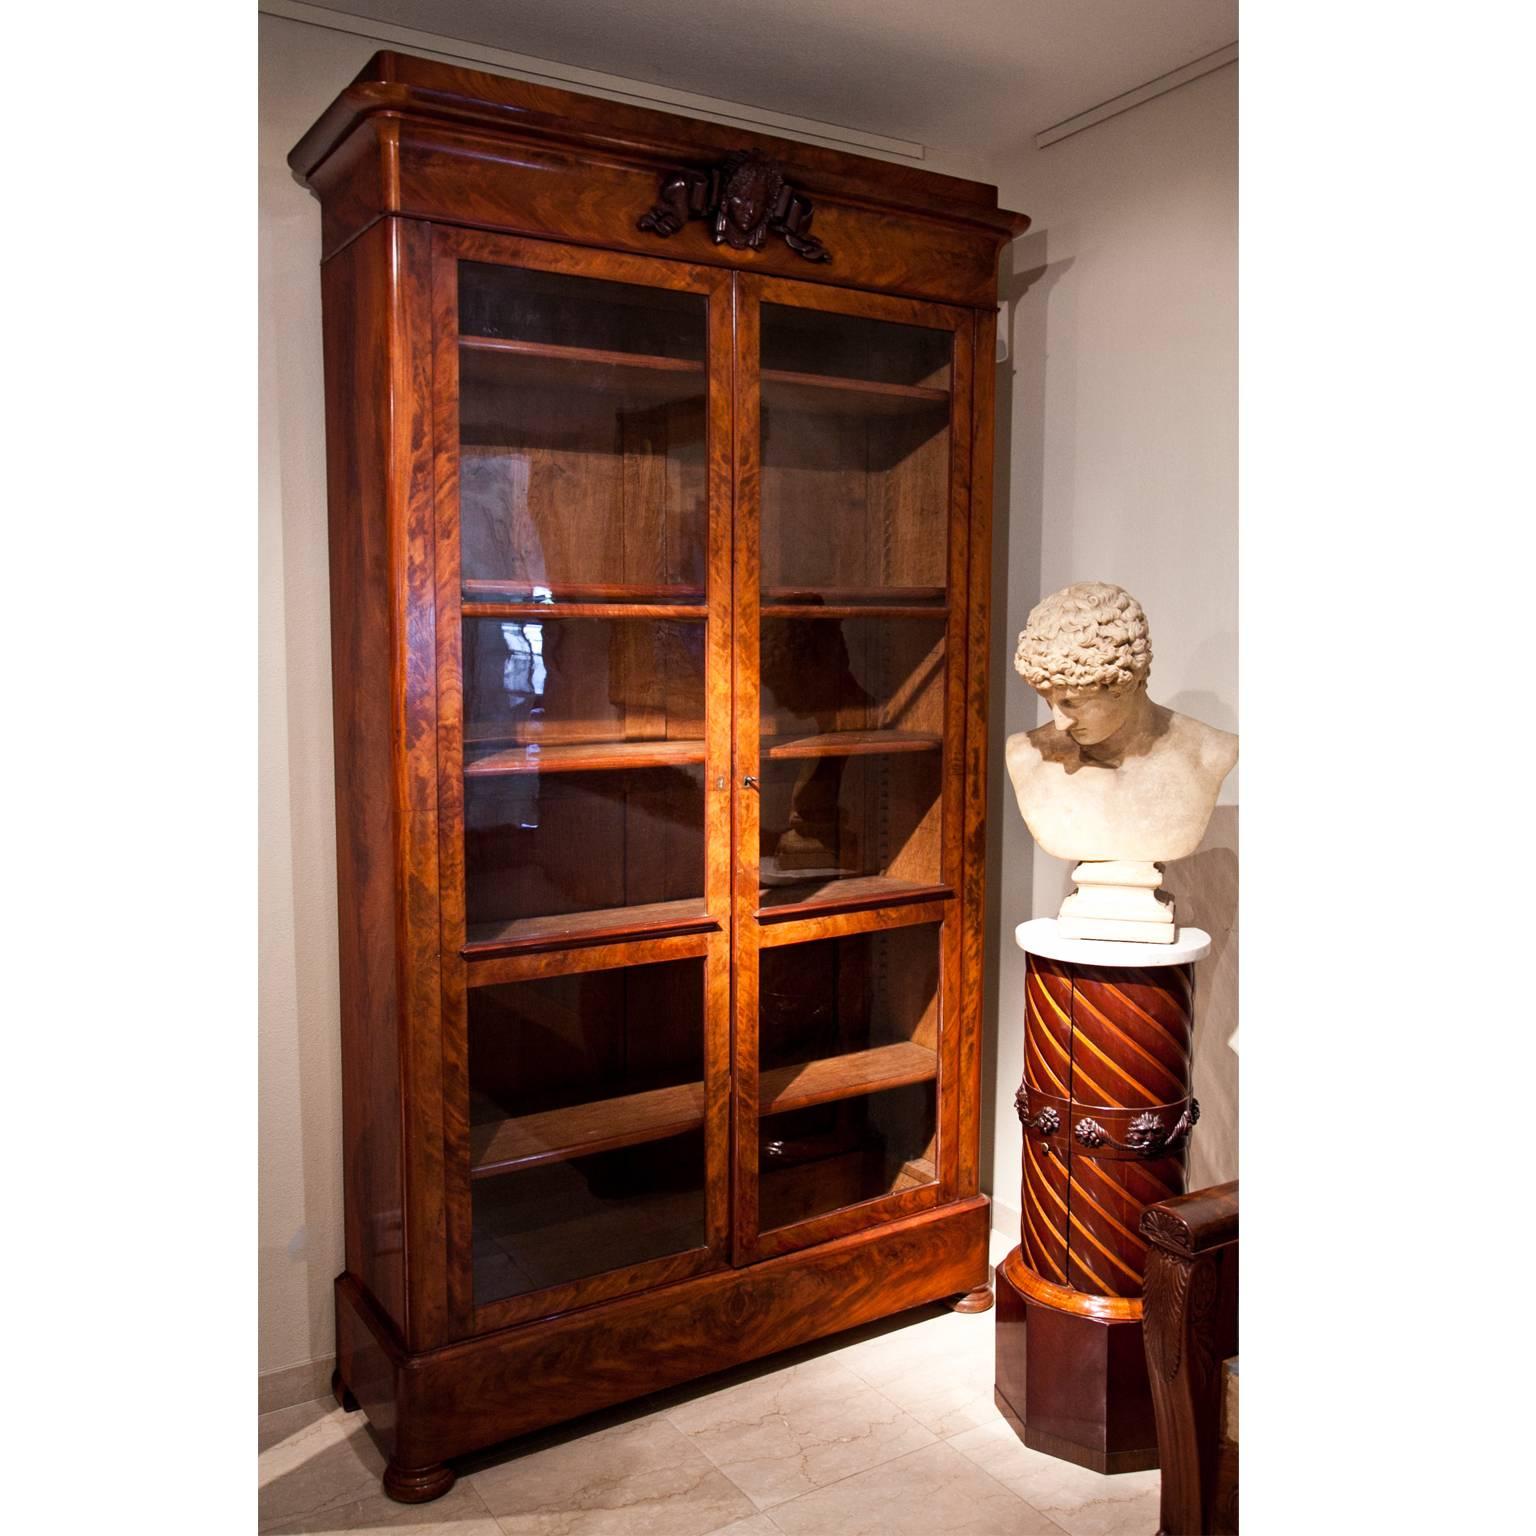 Two-doored mahogany bookcase with a straight base and a slightly protruding top, decorated with a carved female head.